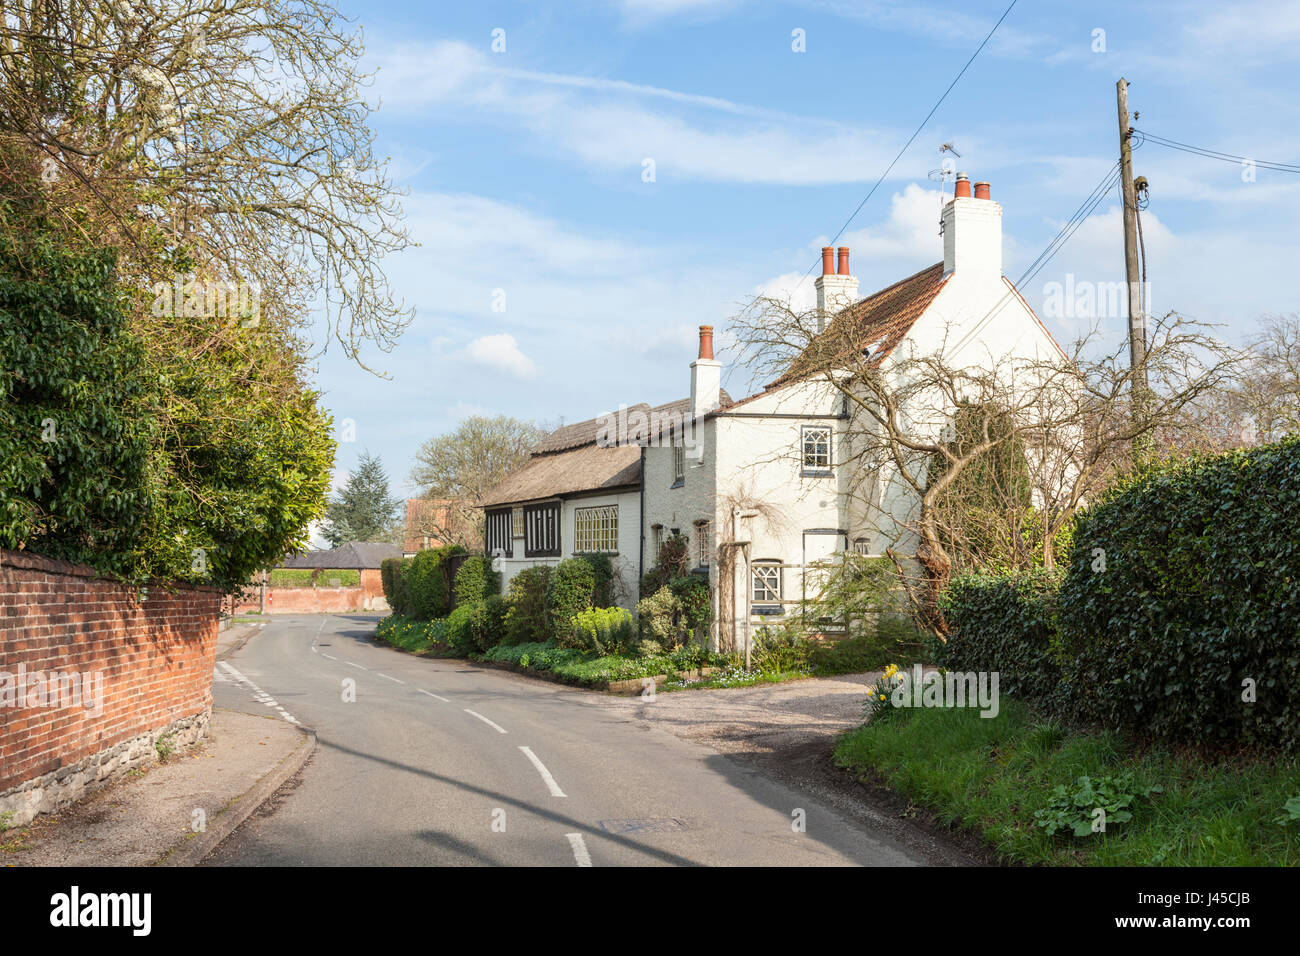 Country lane and house in the rural village of Cropwell Butler, Nottinghamshire, England, UK Stock Photo